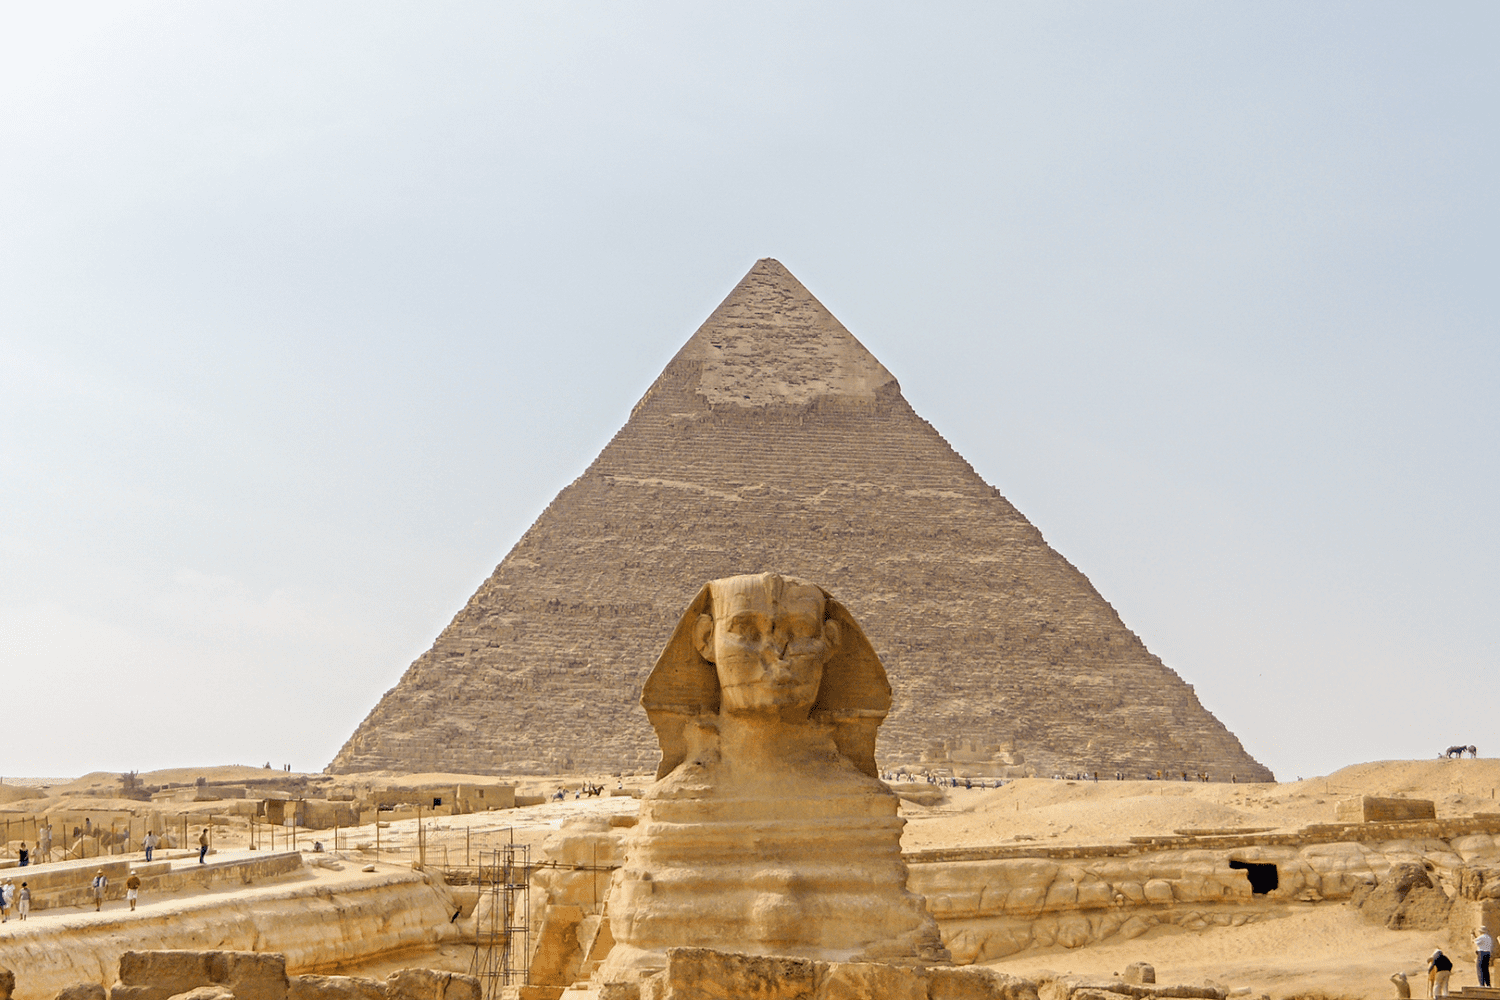 The Pyramids of Giza - Cairo | Ancient Egypt & The Red Sea Tour | Day & Night at the Pyramids Tour | Egypt in the Golden Age of Travel Luxury Tour | Essential Egypt Tour | The Magic of Jordan & Egypt Tour